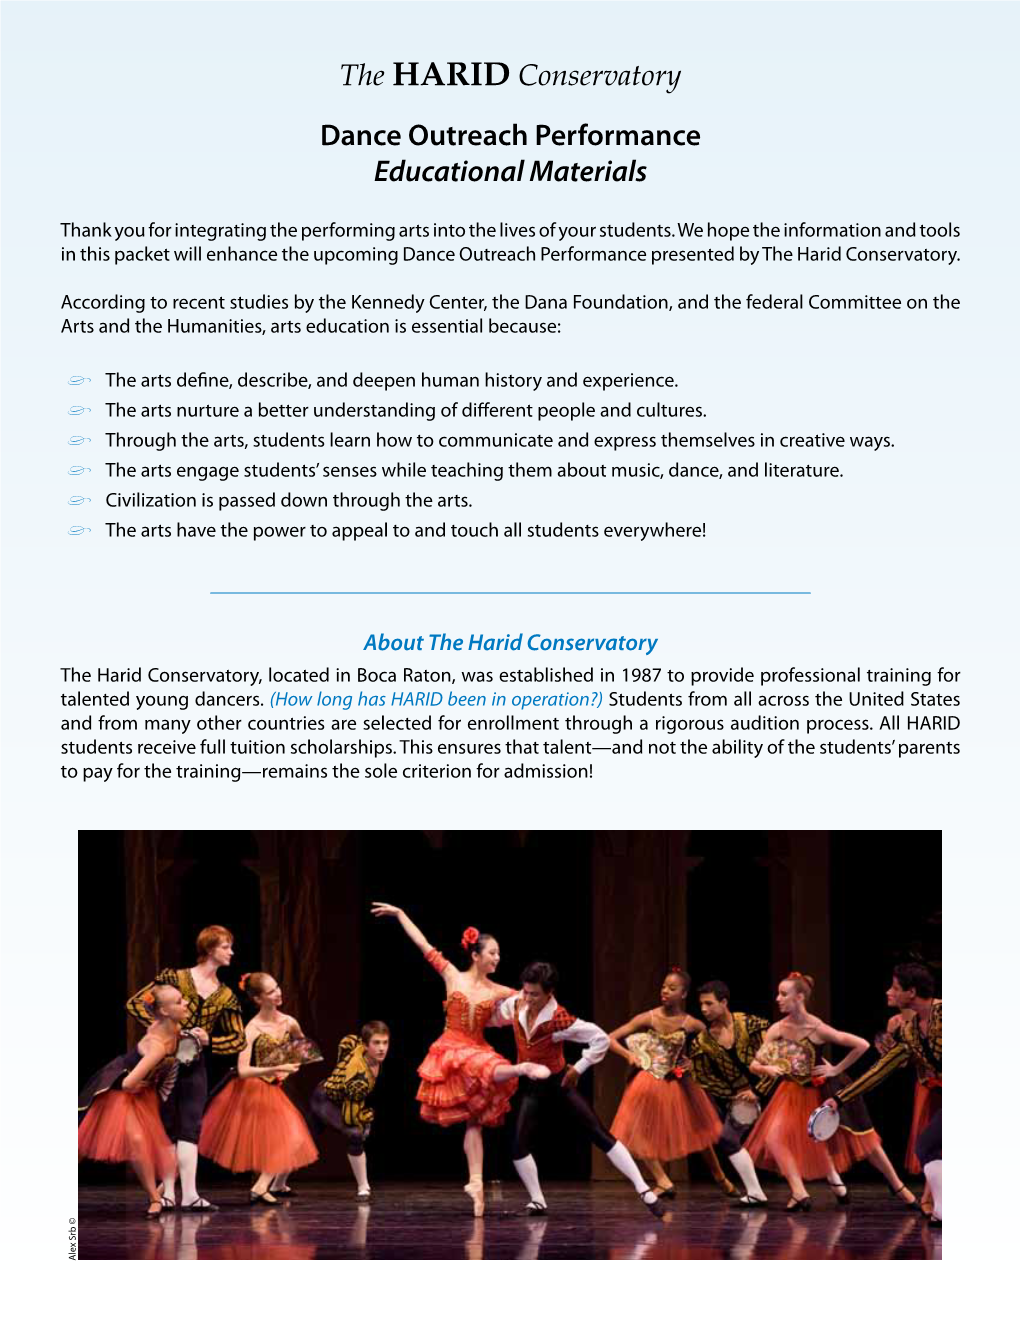 The HARID Conservatory Dance Outreach Performance Educational Materials